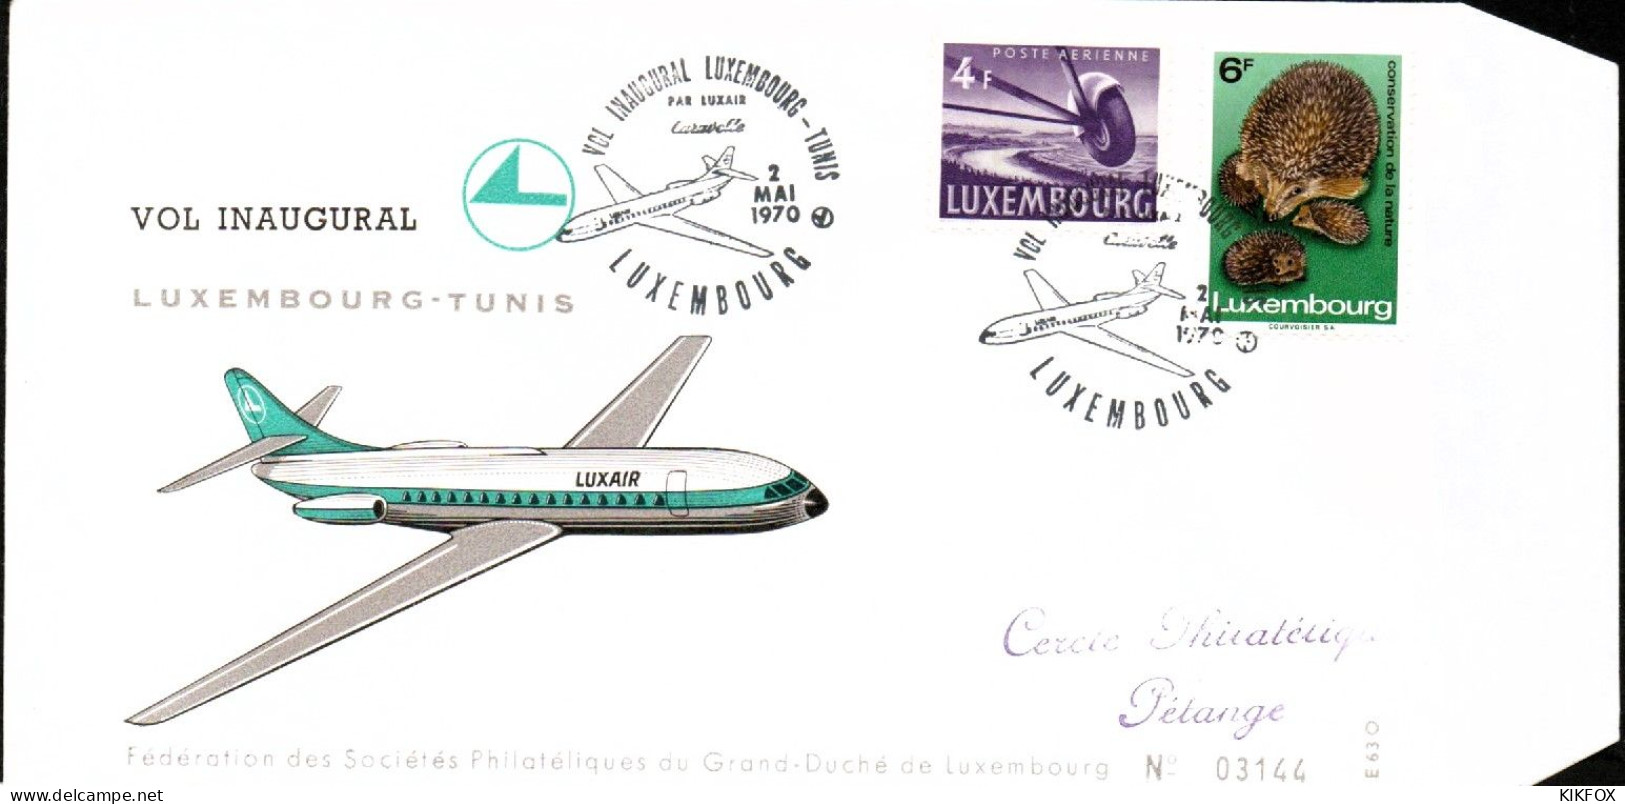 Luxembourg , Luxemburg , 2 Mai 1970 FDC - Vol Inaugural Luxembourg-Tunis , Timbres MI 406, 805, GESTEMPELT - Storia Postale